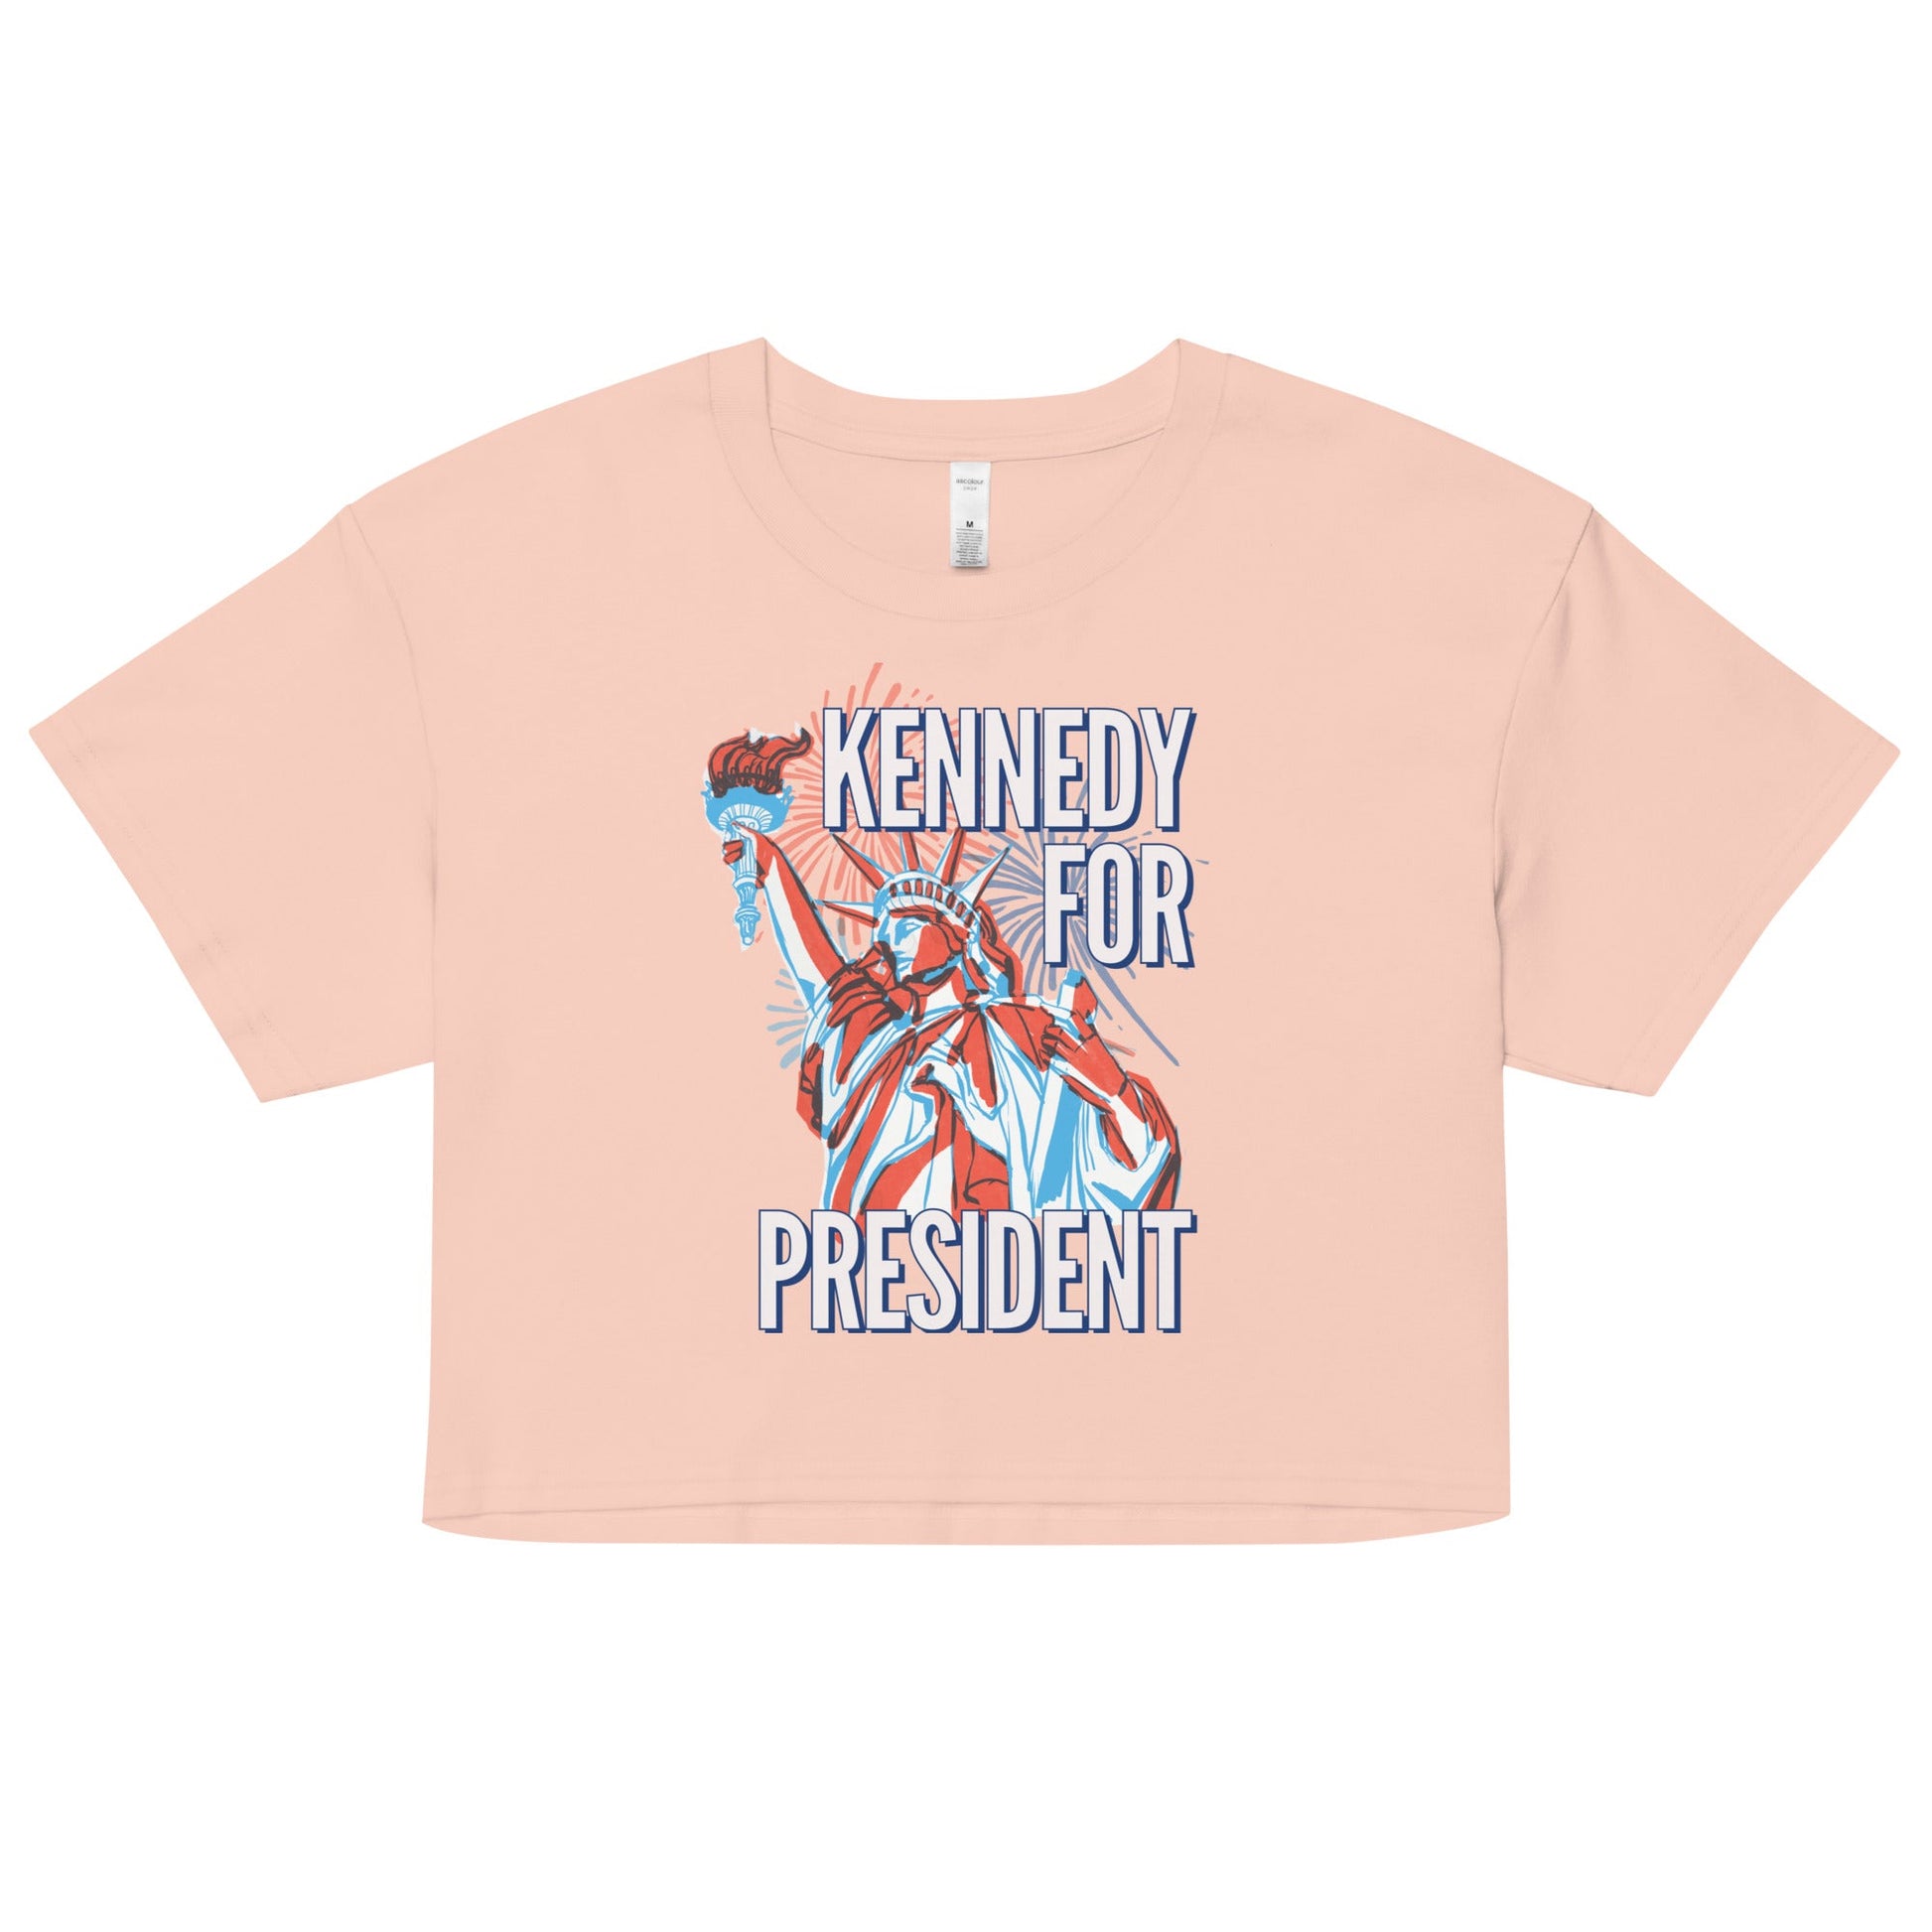 Kennedy for Liberty Women’s Crop Top - TEAM KENNEDY. All rights reserved